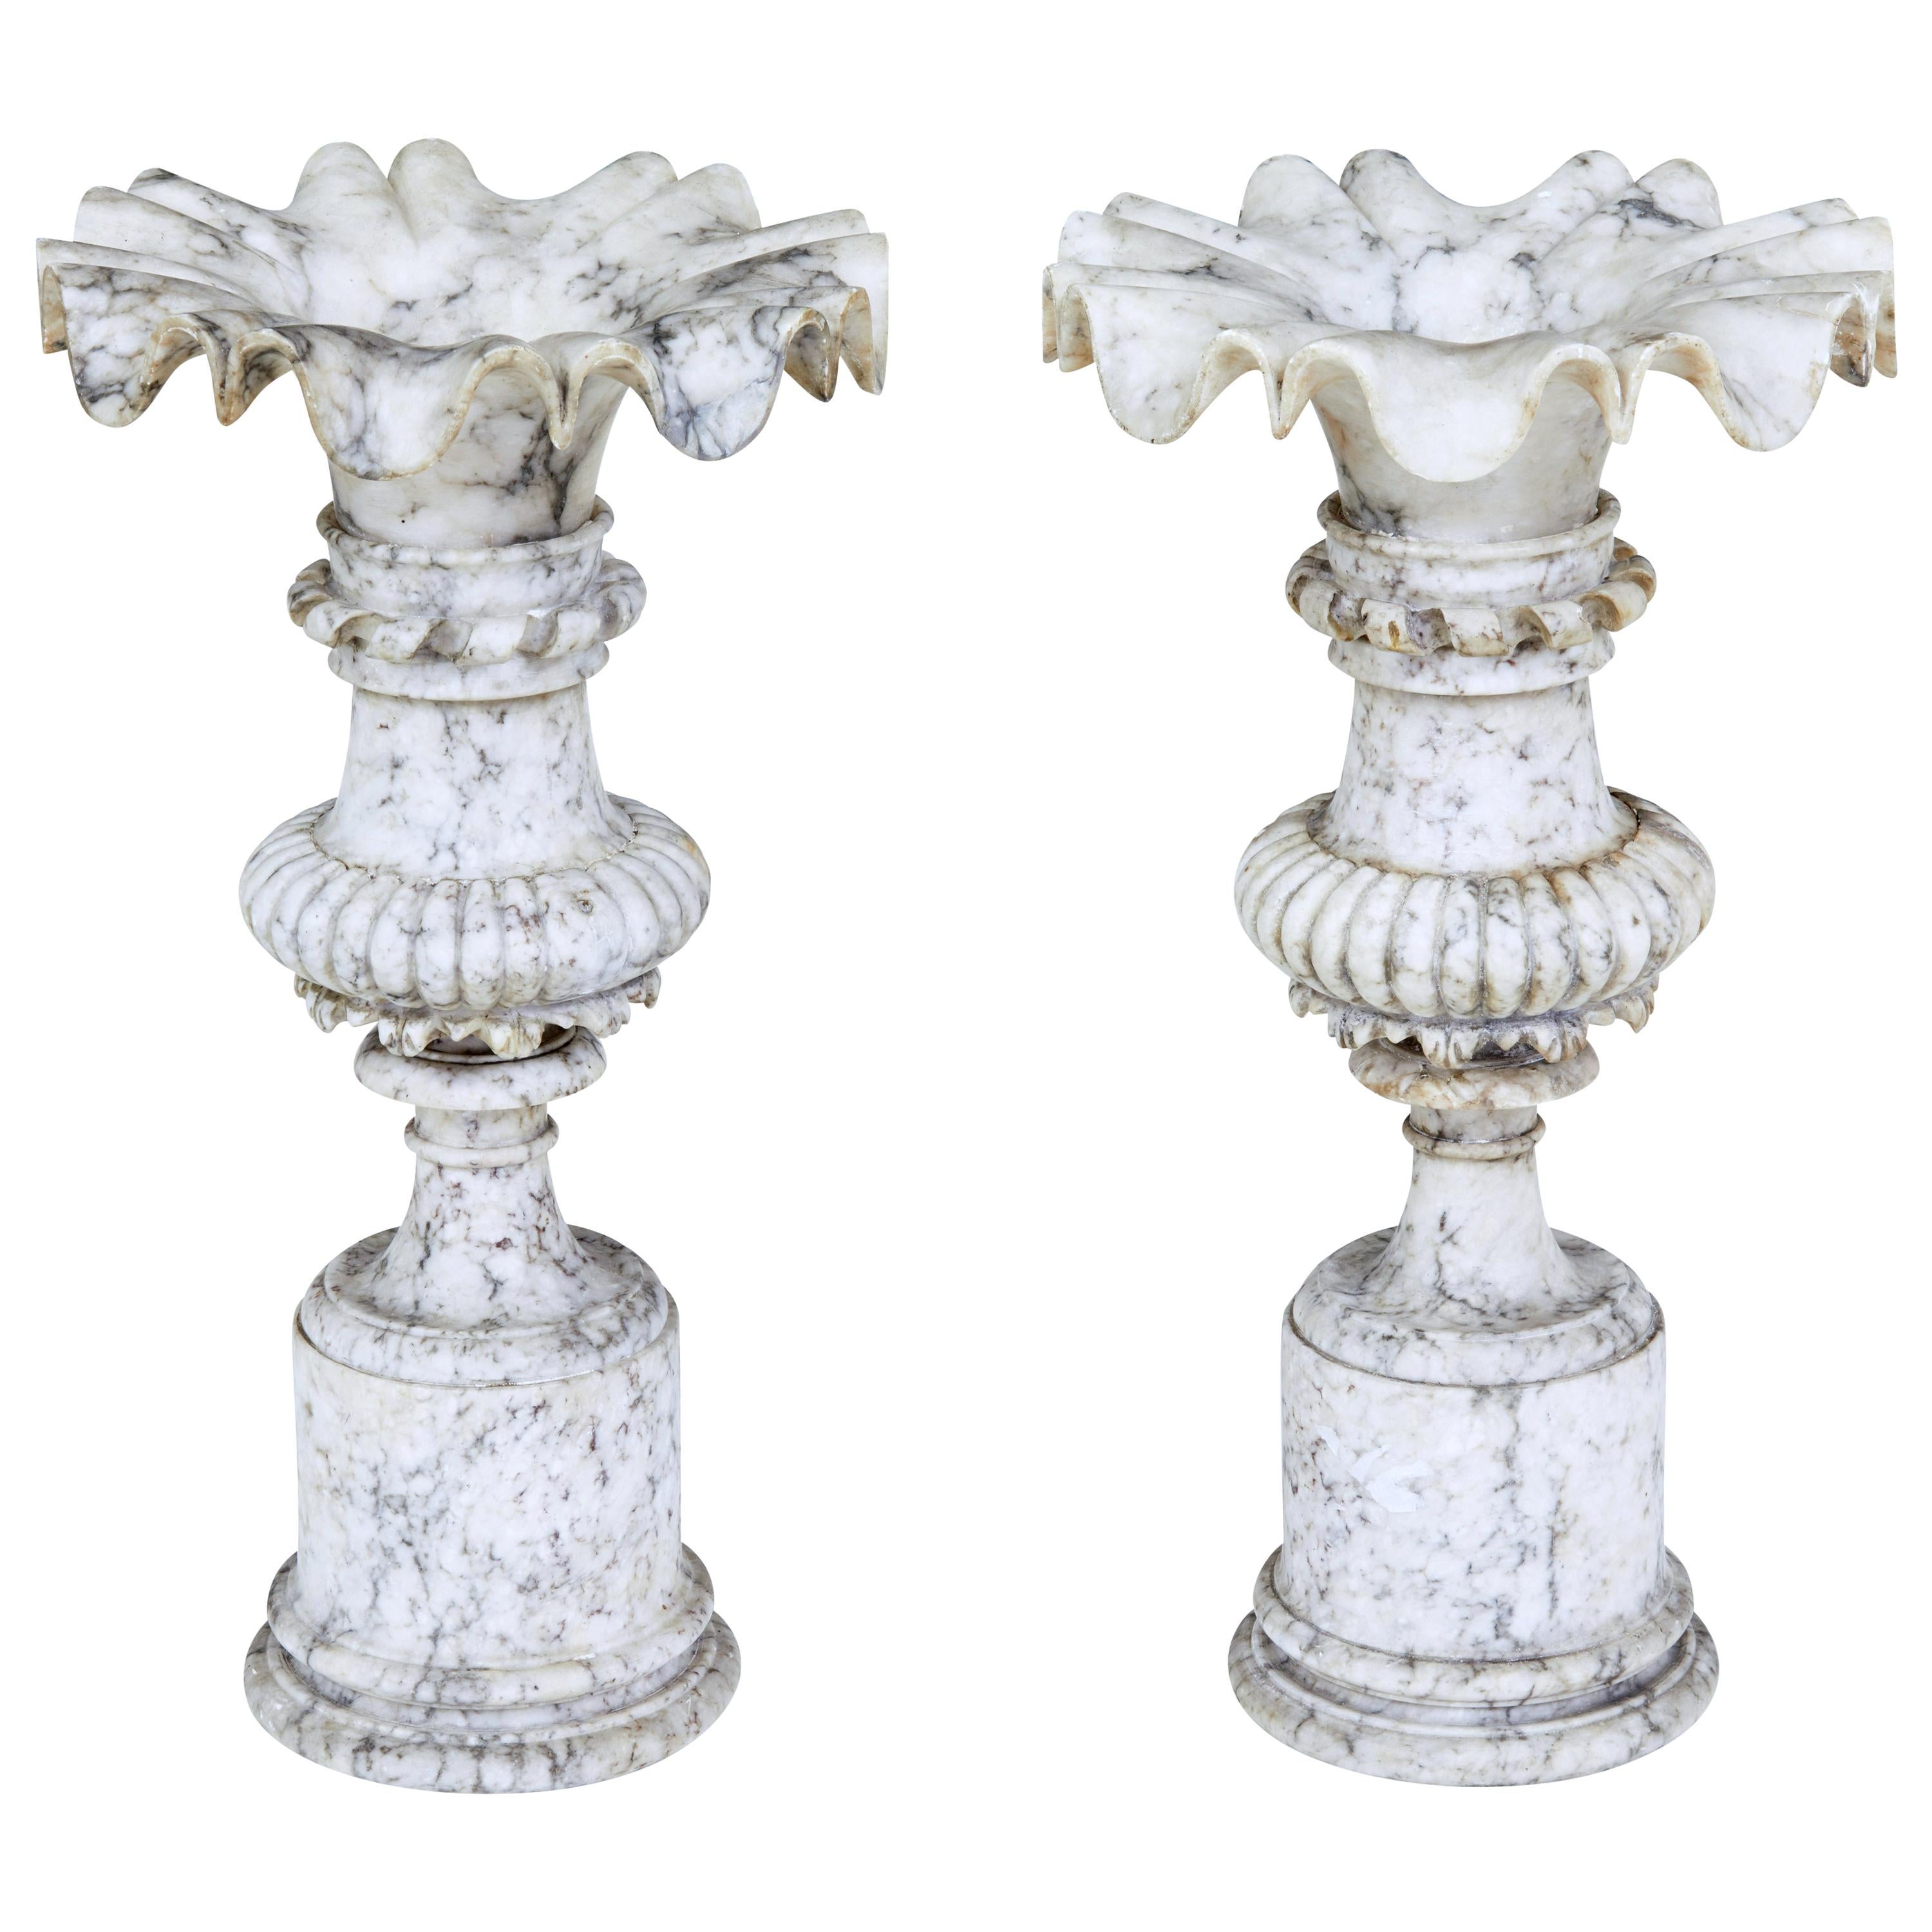 Fine Pair of French 19th Century Decorative Alabaster Urns